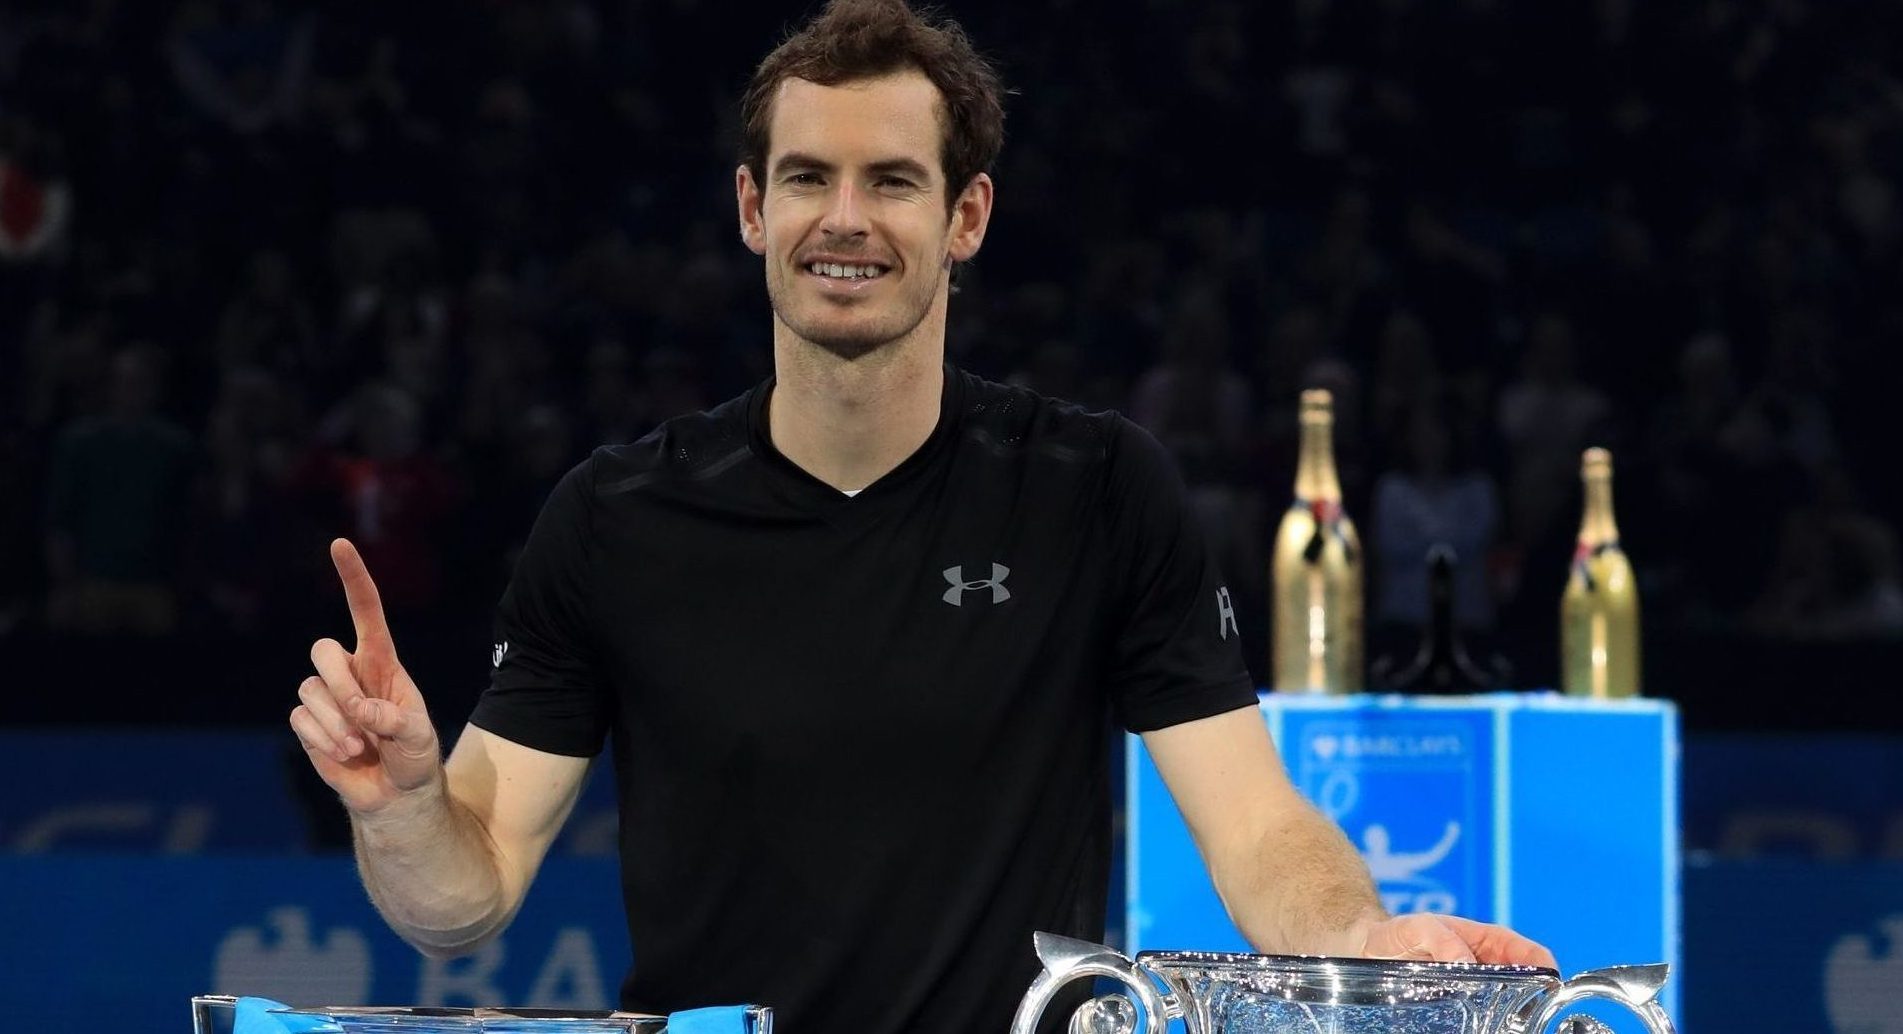 Andy Murray has reached the top of tennis in 2016.